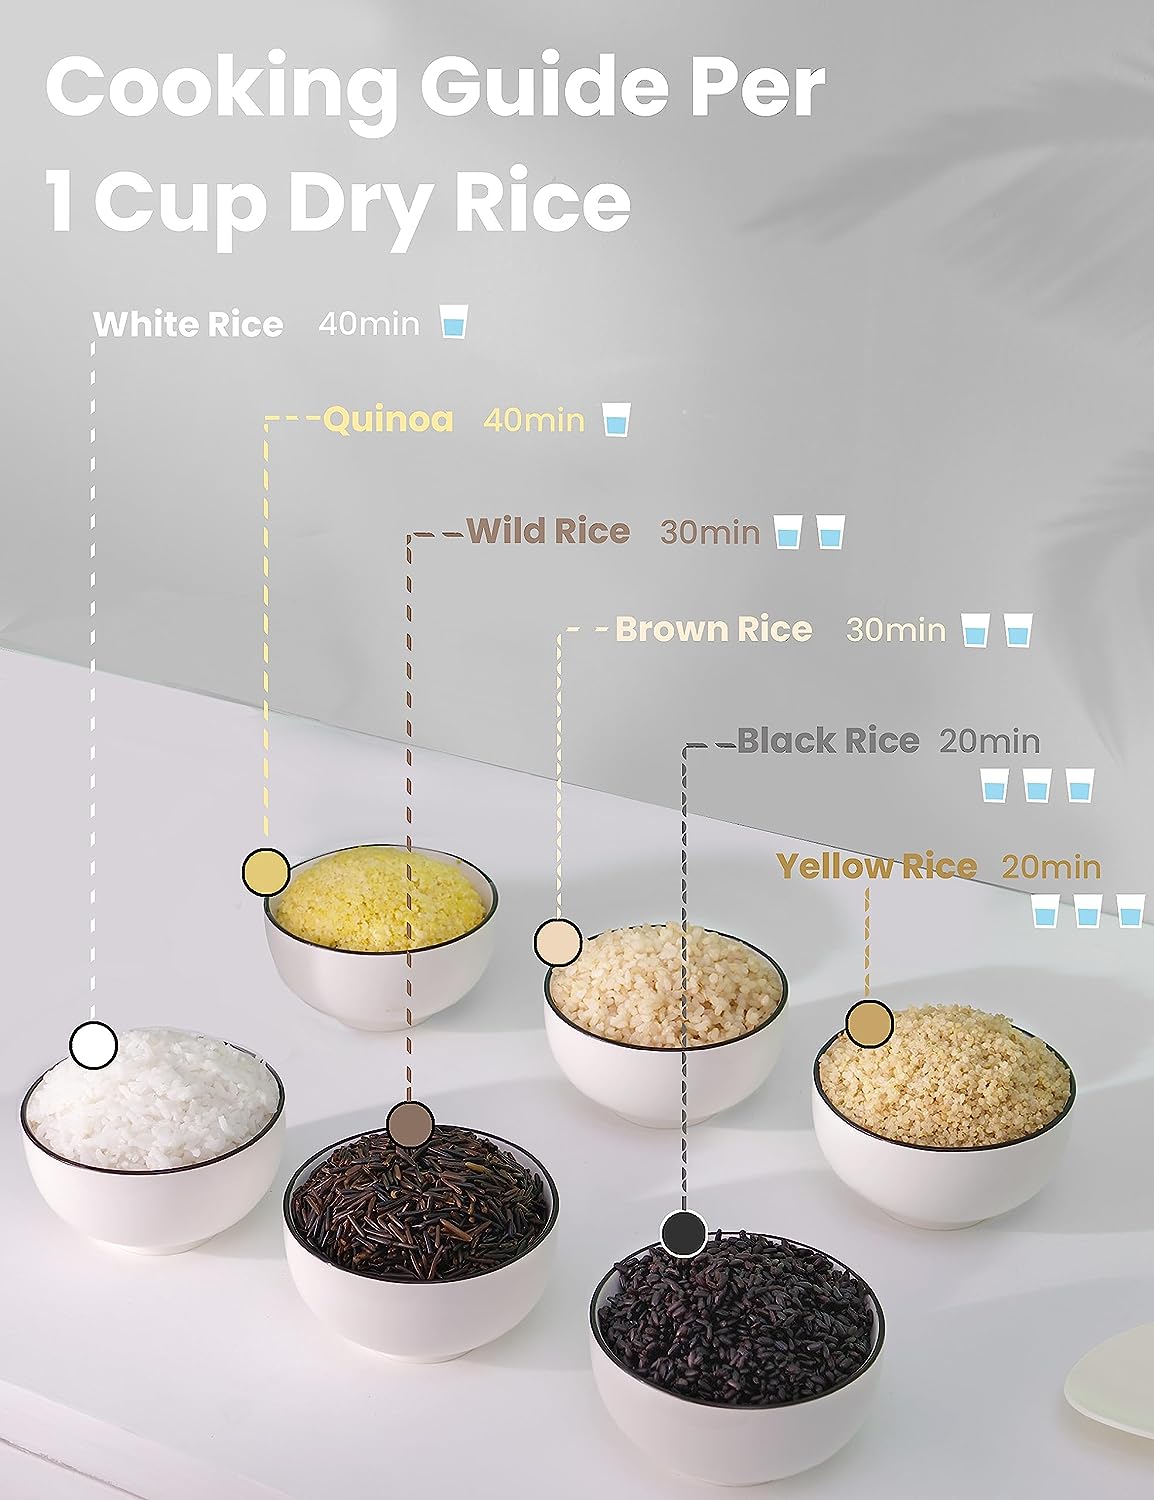 Rice Plus™ Multi-Cooker with Fuzzy Logic Technology